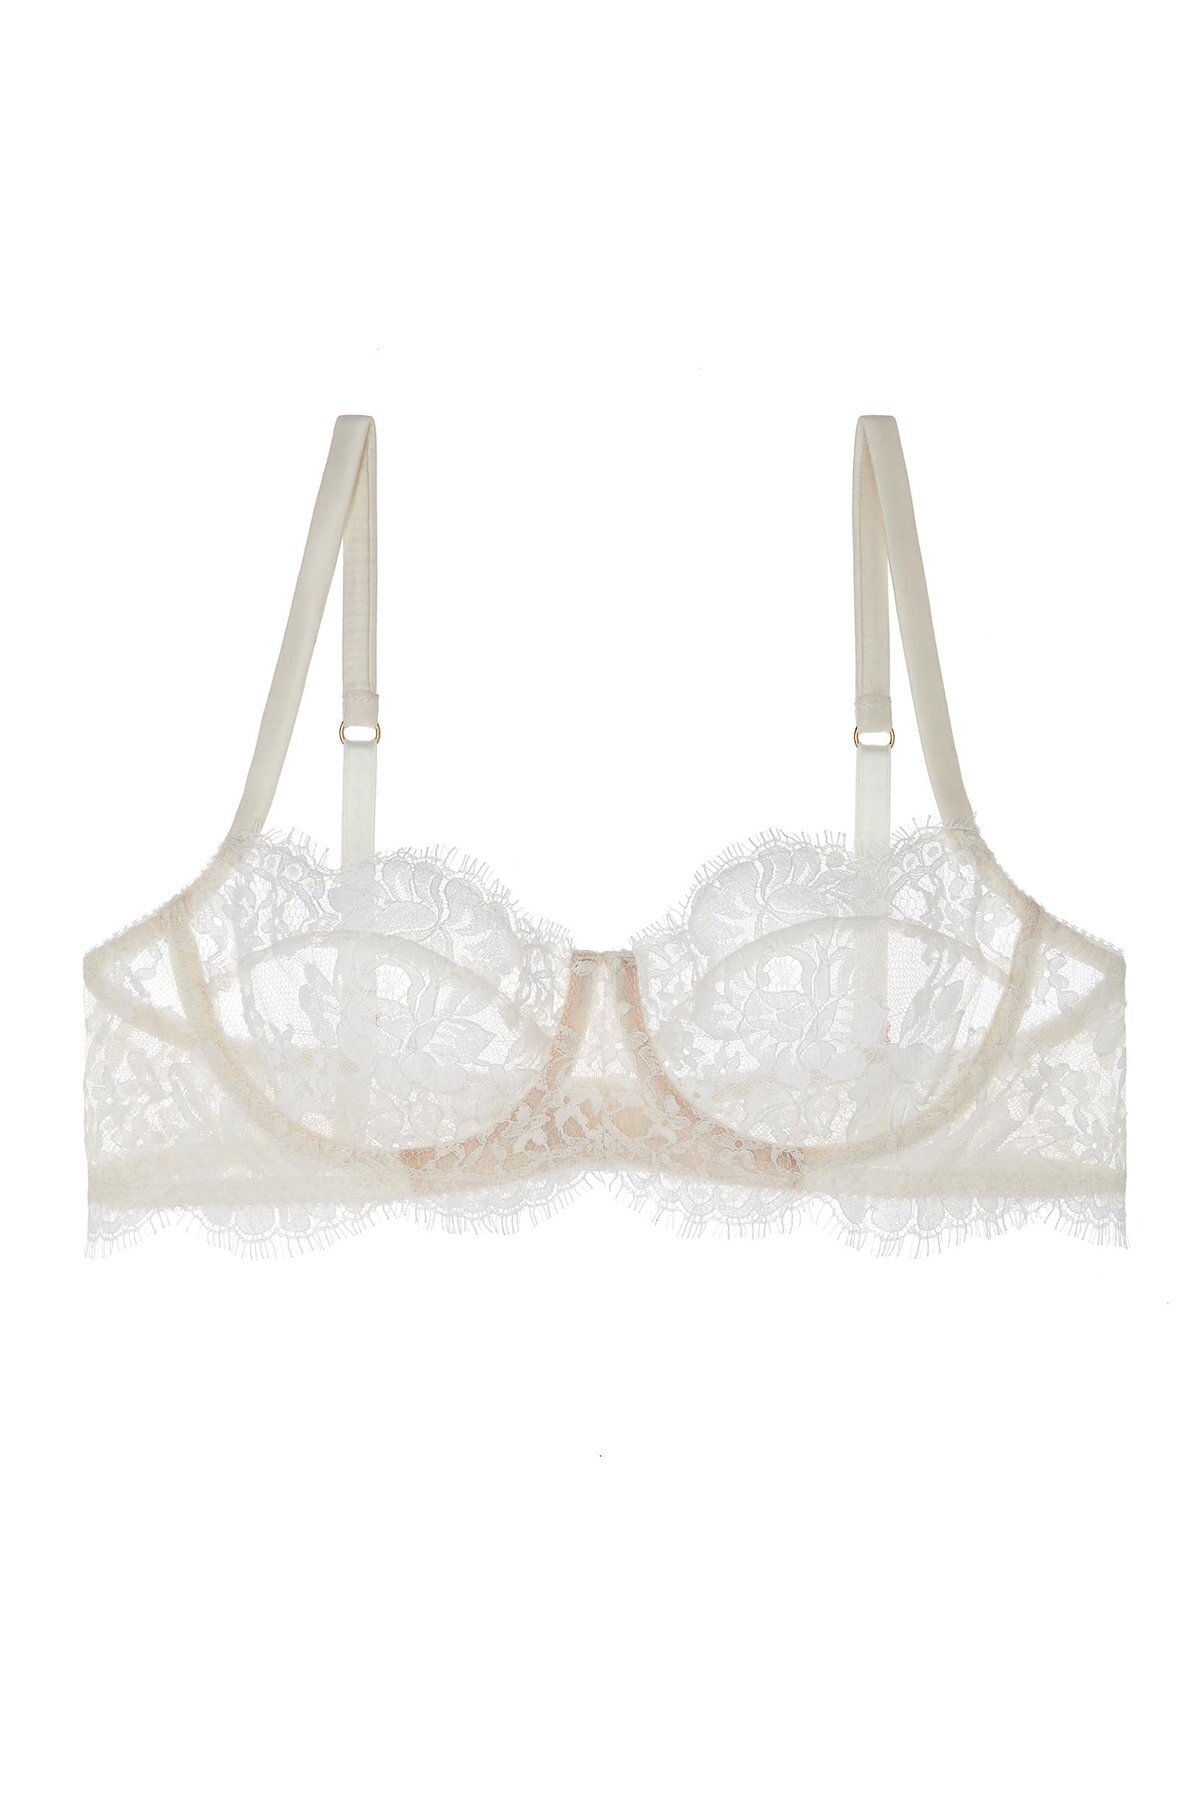 Lace Bra with Underwire for Weddings, Honeymoons, and Ever After